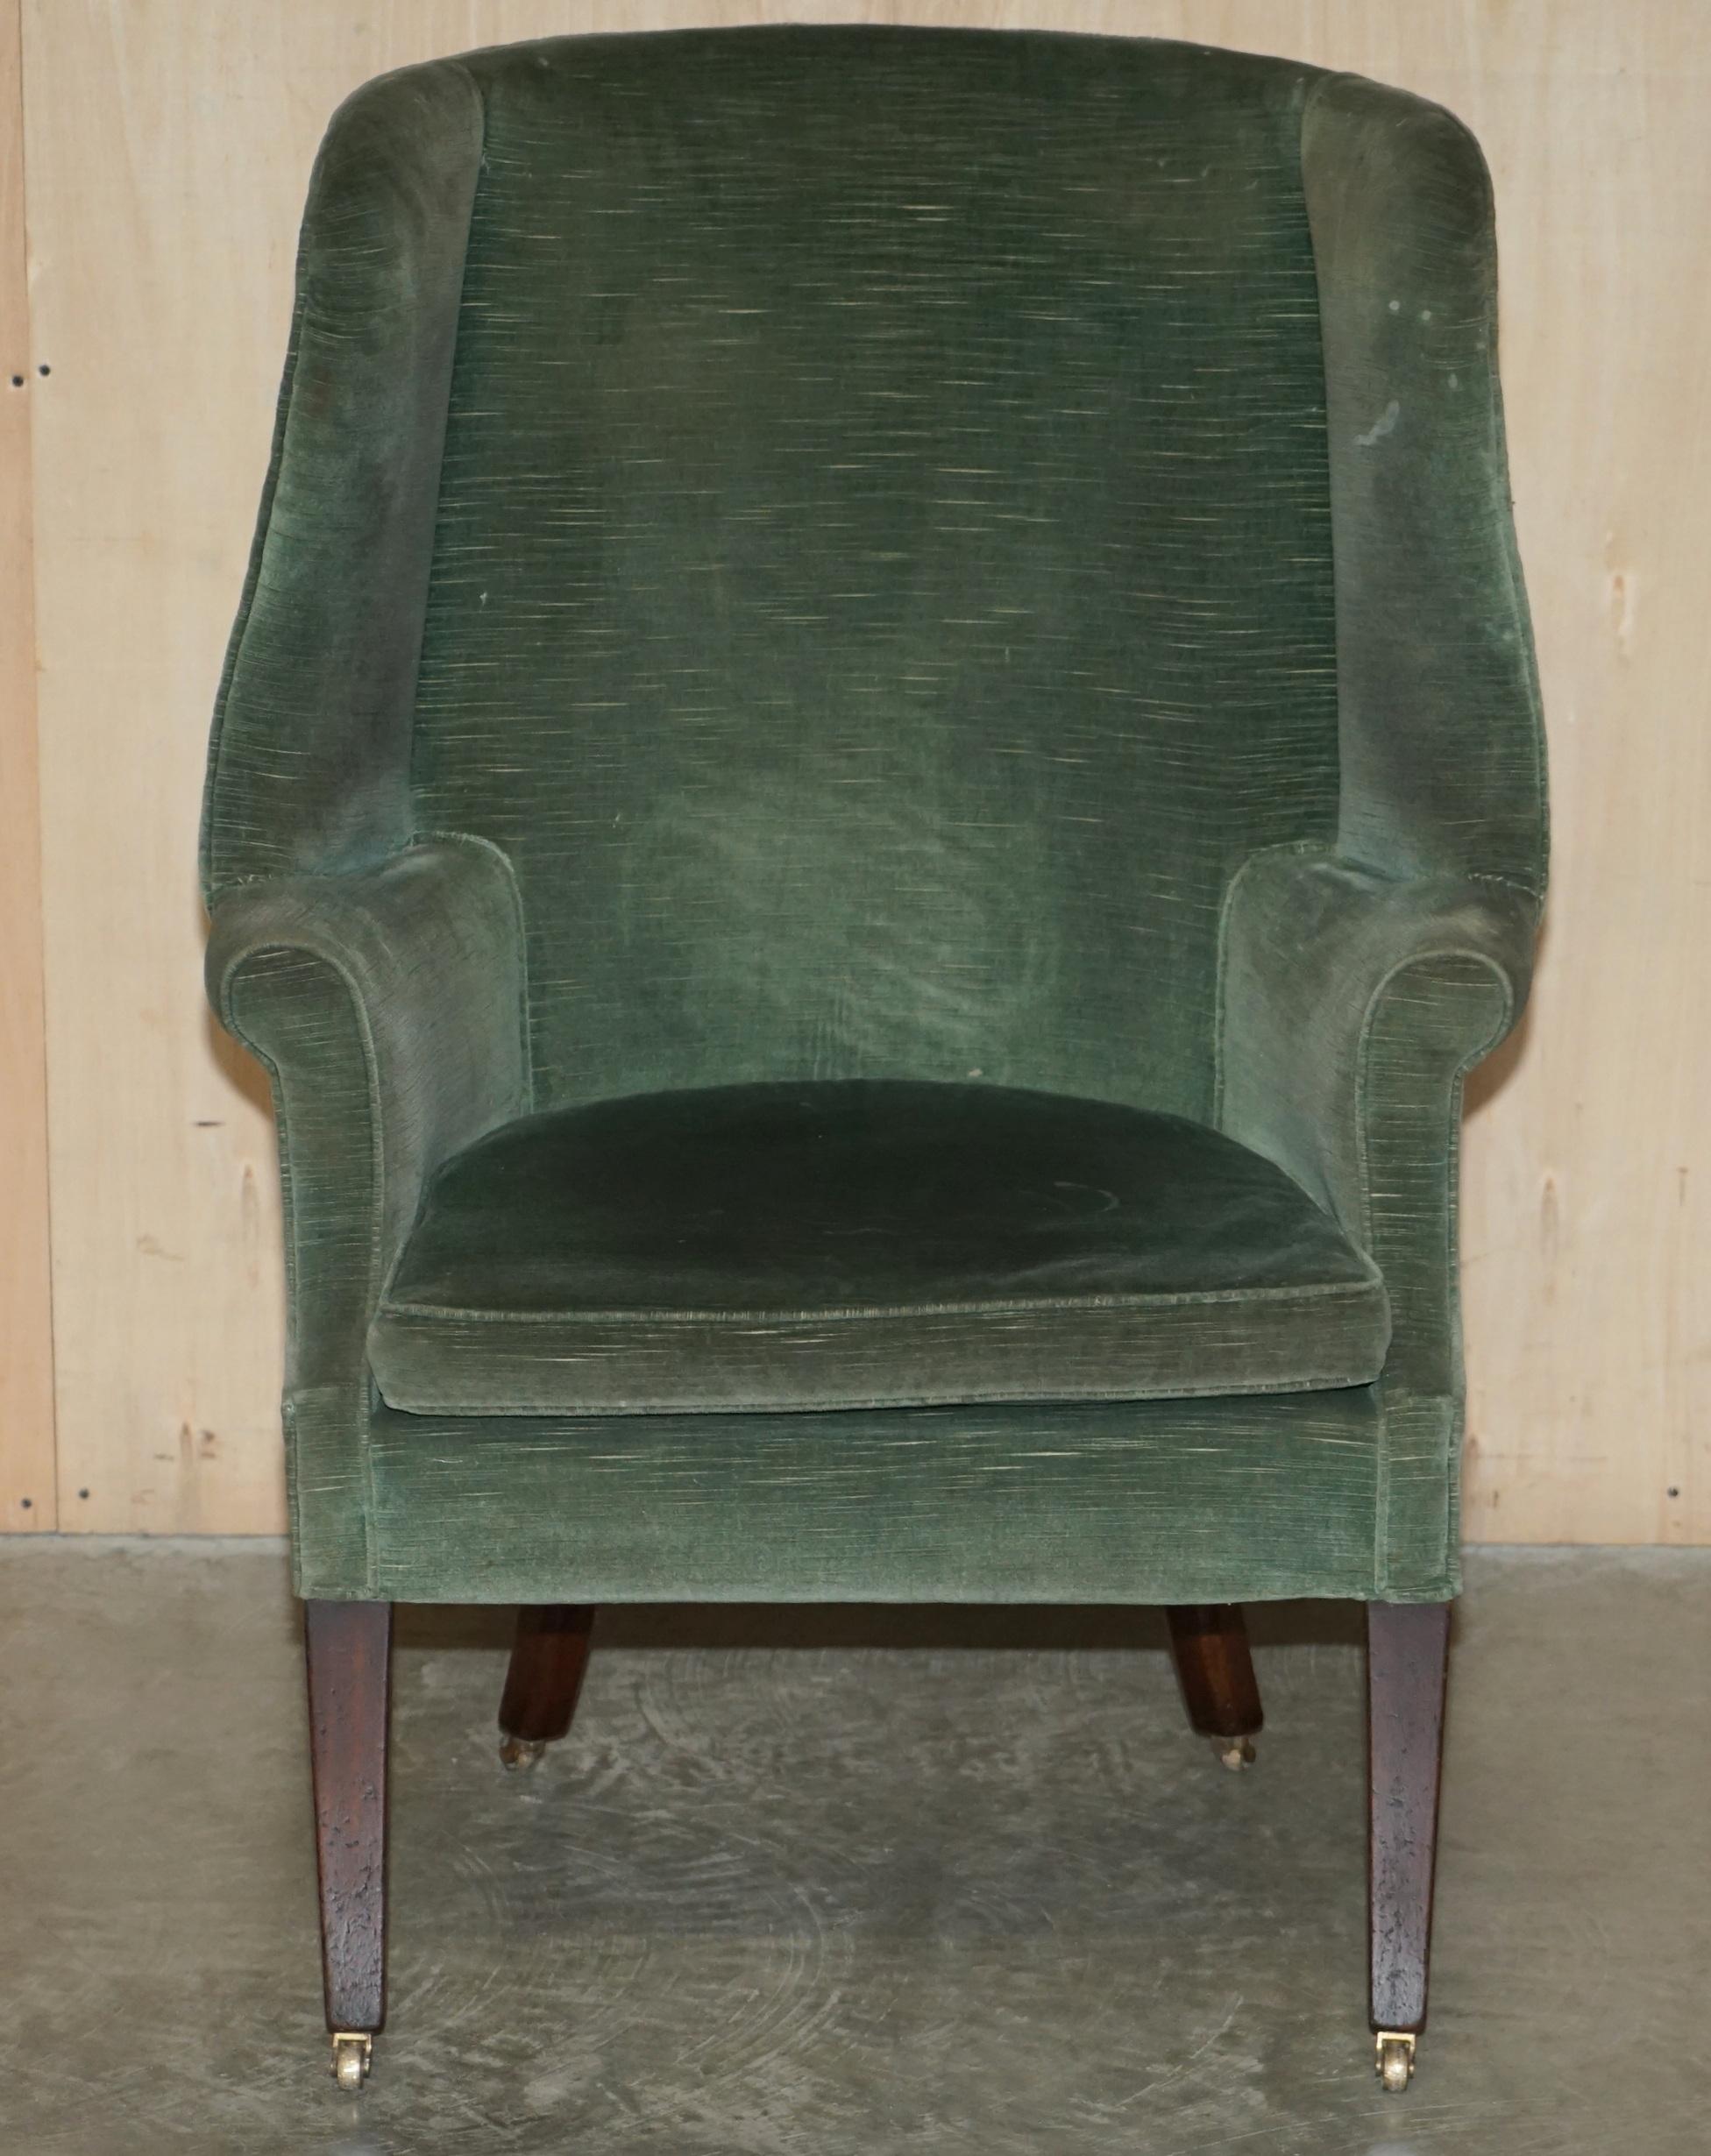 We are delighted to offer for sale this Antique Victorian Porters barrel back armchair in circa 1940's Teal Velour fabric ideal for reupholstery.

This chair a real tour de force, is has absolutely everything going for it, the legs are elegant and